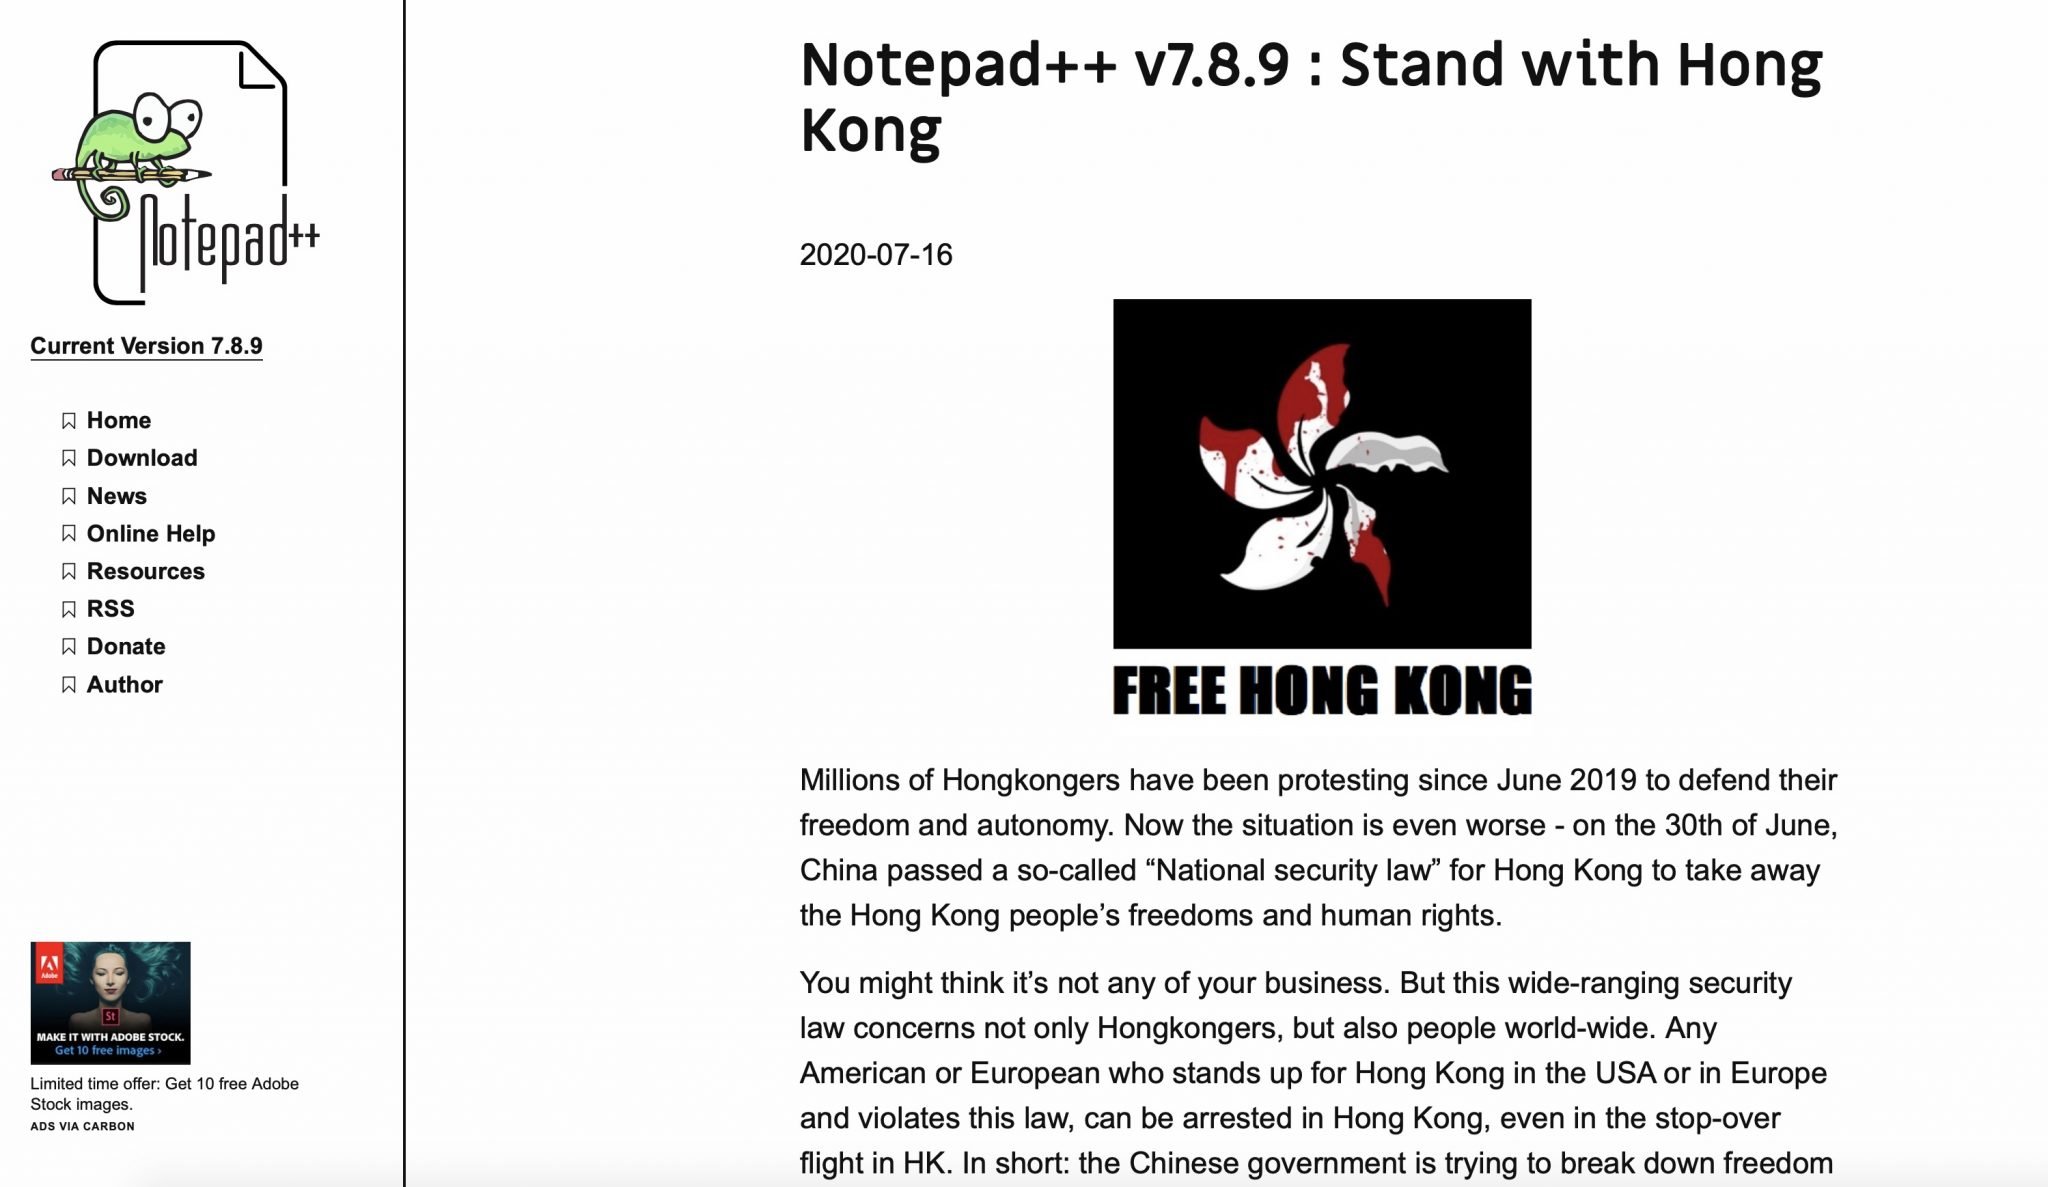 what is notepad++ stand with hong kong